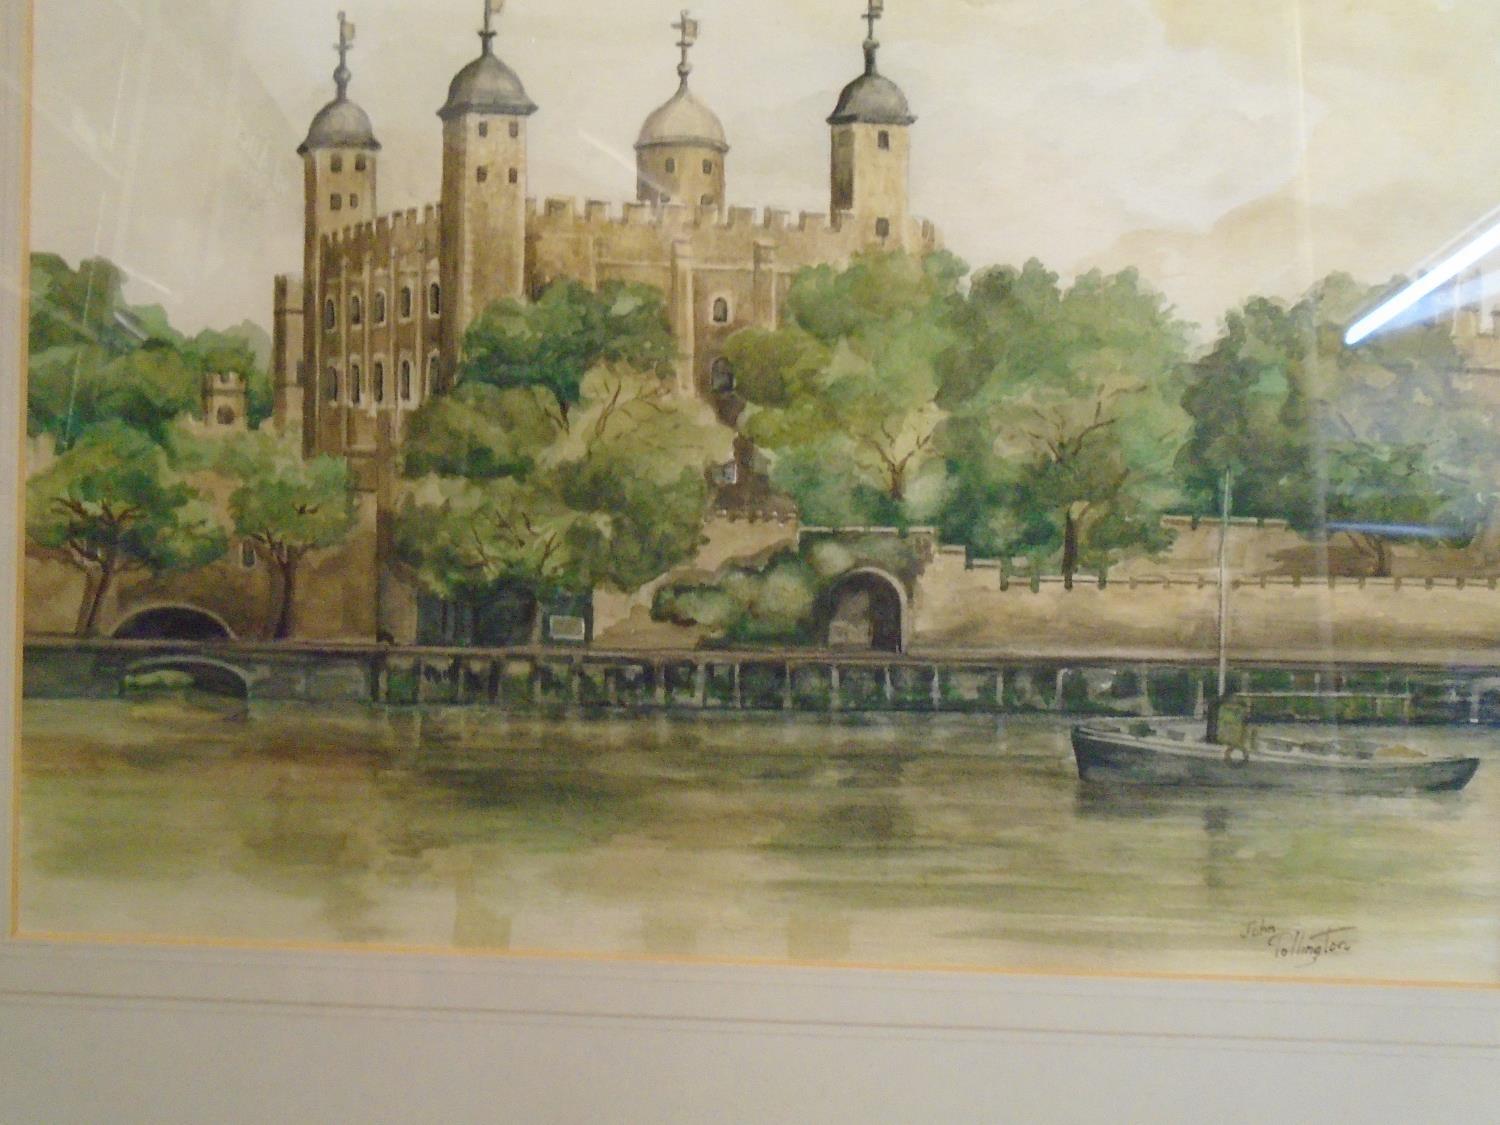 John Pollington - view of the Tower of London from across the River Thames with trees and a sail